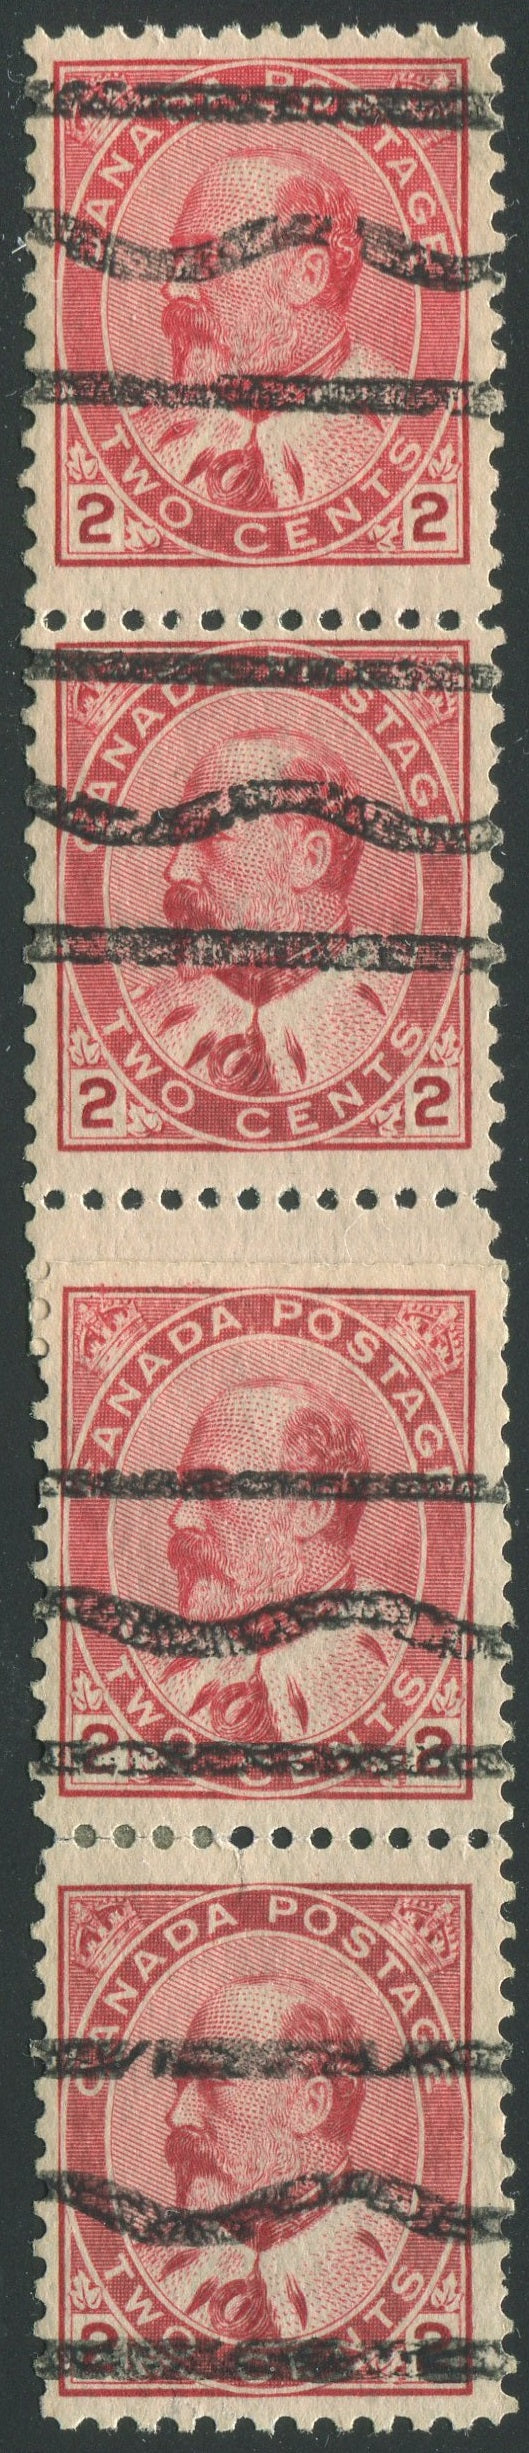 0090CA1810 - Canada #90xxxi - Mint Experimental Coil Paste-Up Strip of 4